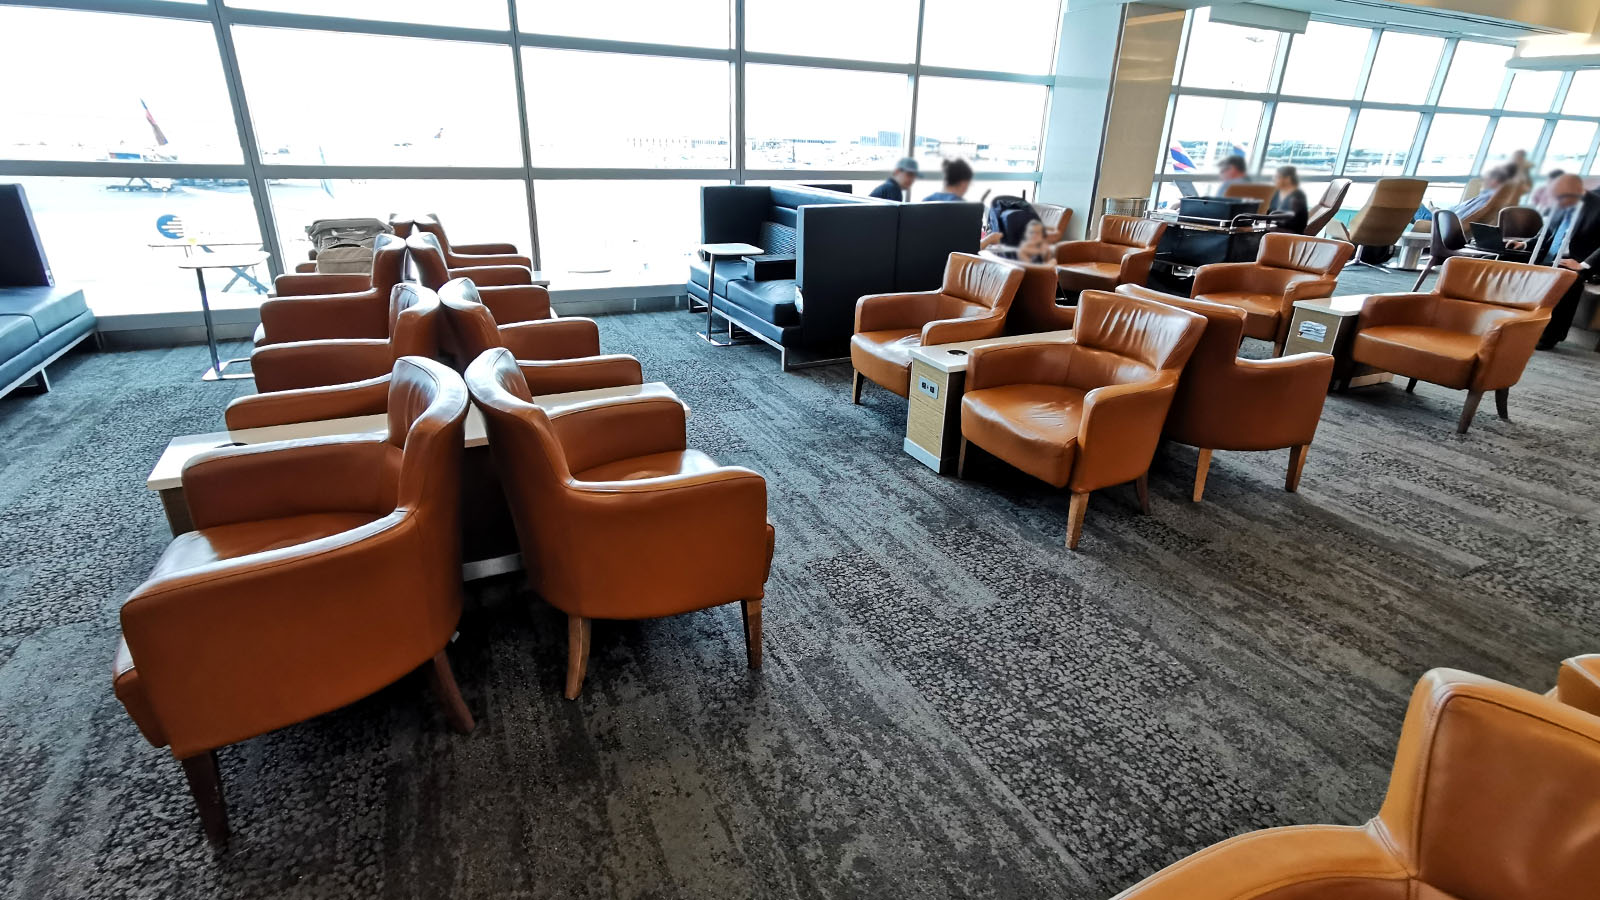 Chairs in the Delta Sky Club New York JFK T4B